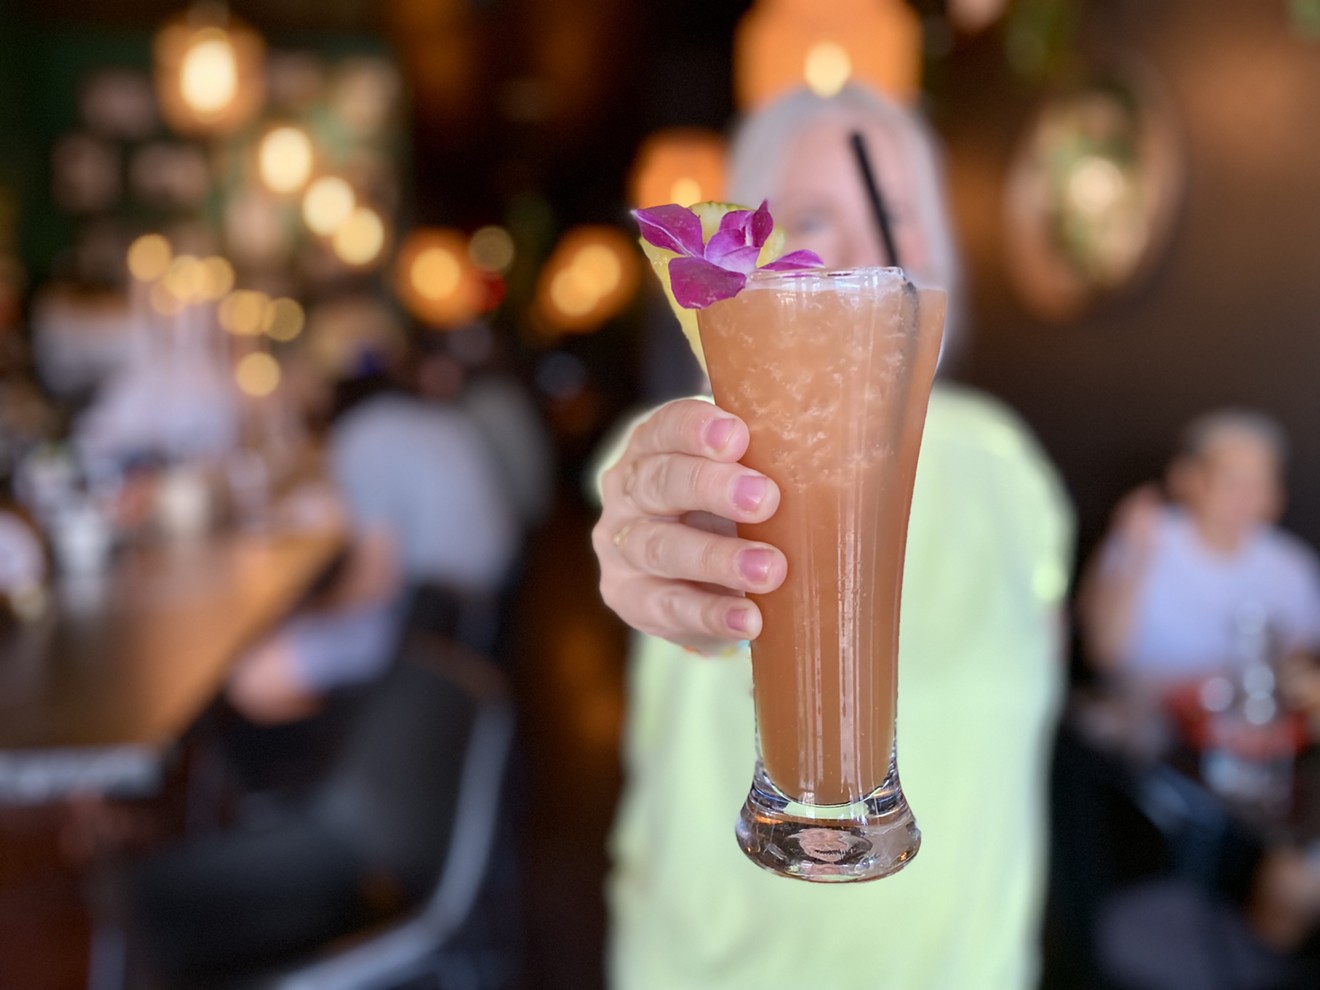 The Sonoran Sling at Espiritu is a spicy, tropical sip with chiltepin-infused bacanora.